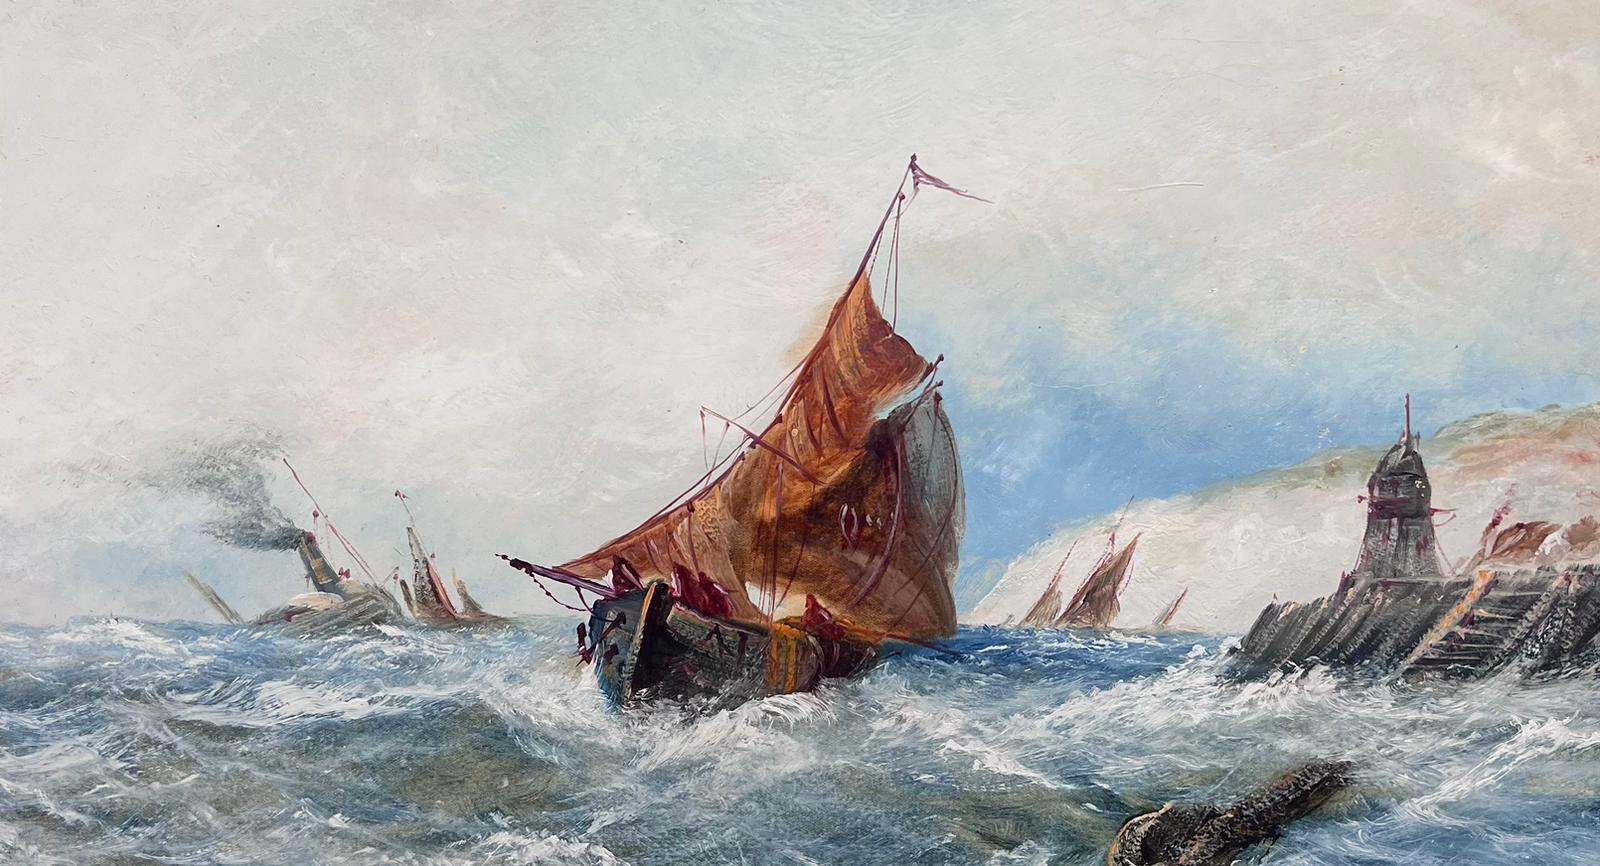 19th Century English School. Landscape Painting - Antique English Marine Oil Painting Shipping in Rough Seas off Harbor Coast